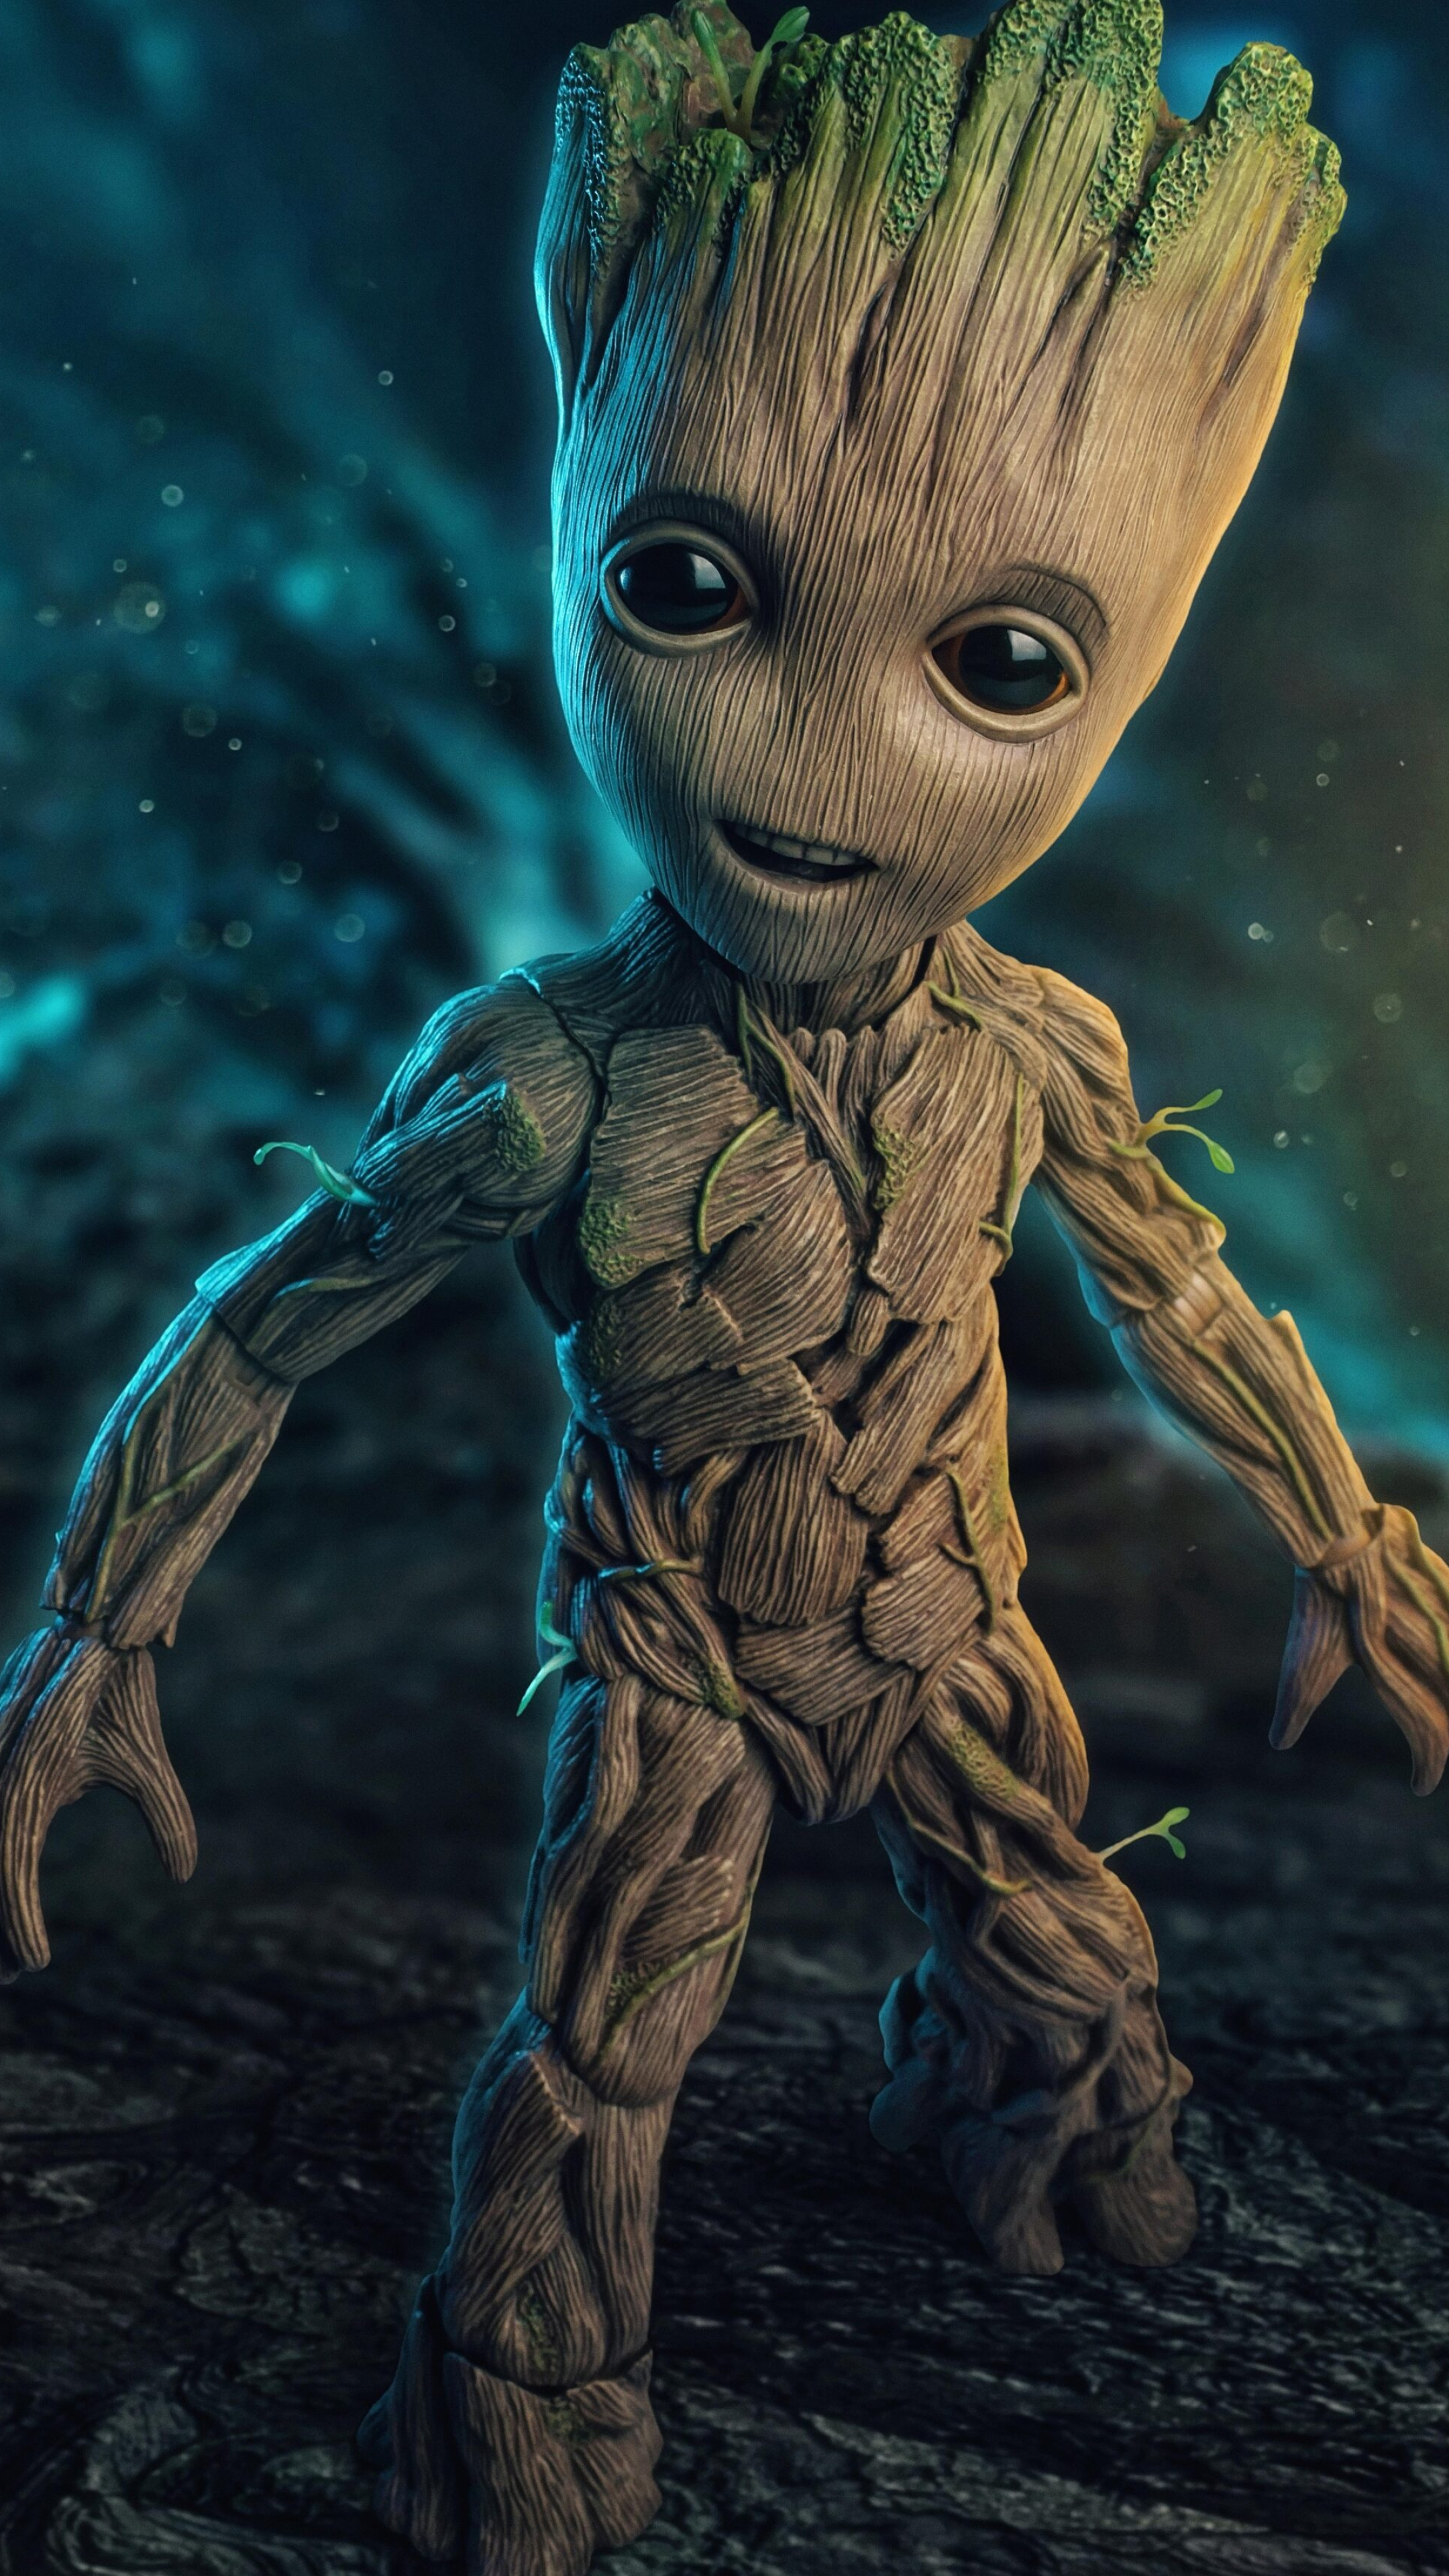 Baby Groot in 4K, 2018 Sony Xperia wallpaper, High-resolution images, Marvel superhero, 2160x3840 4K Handy